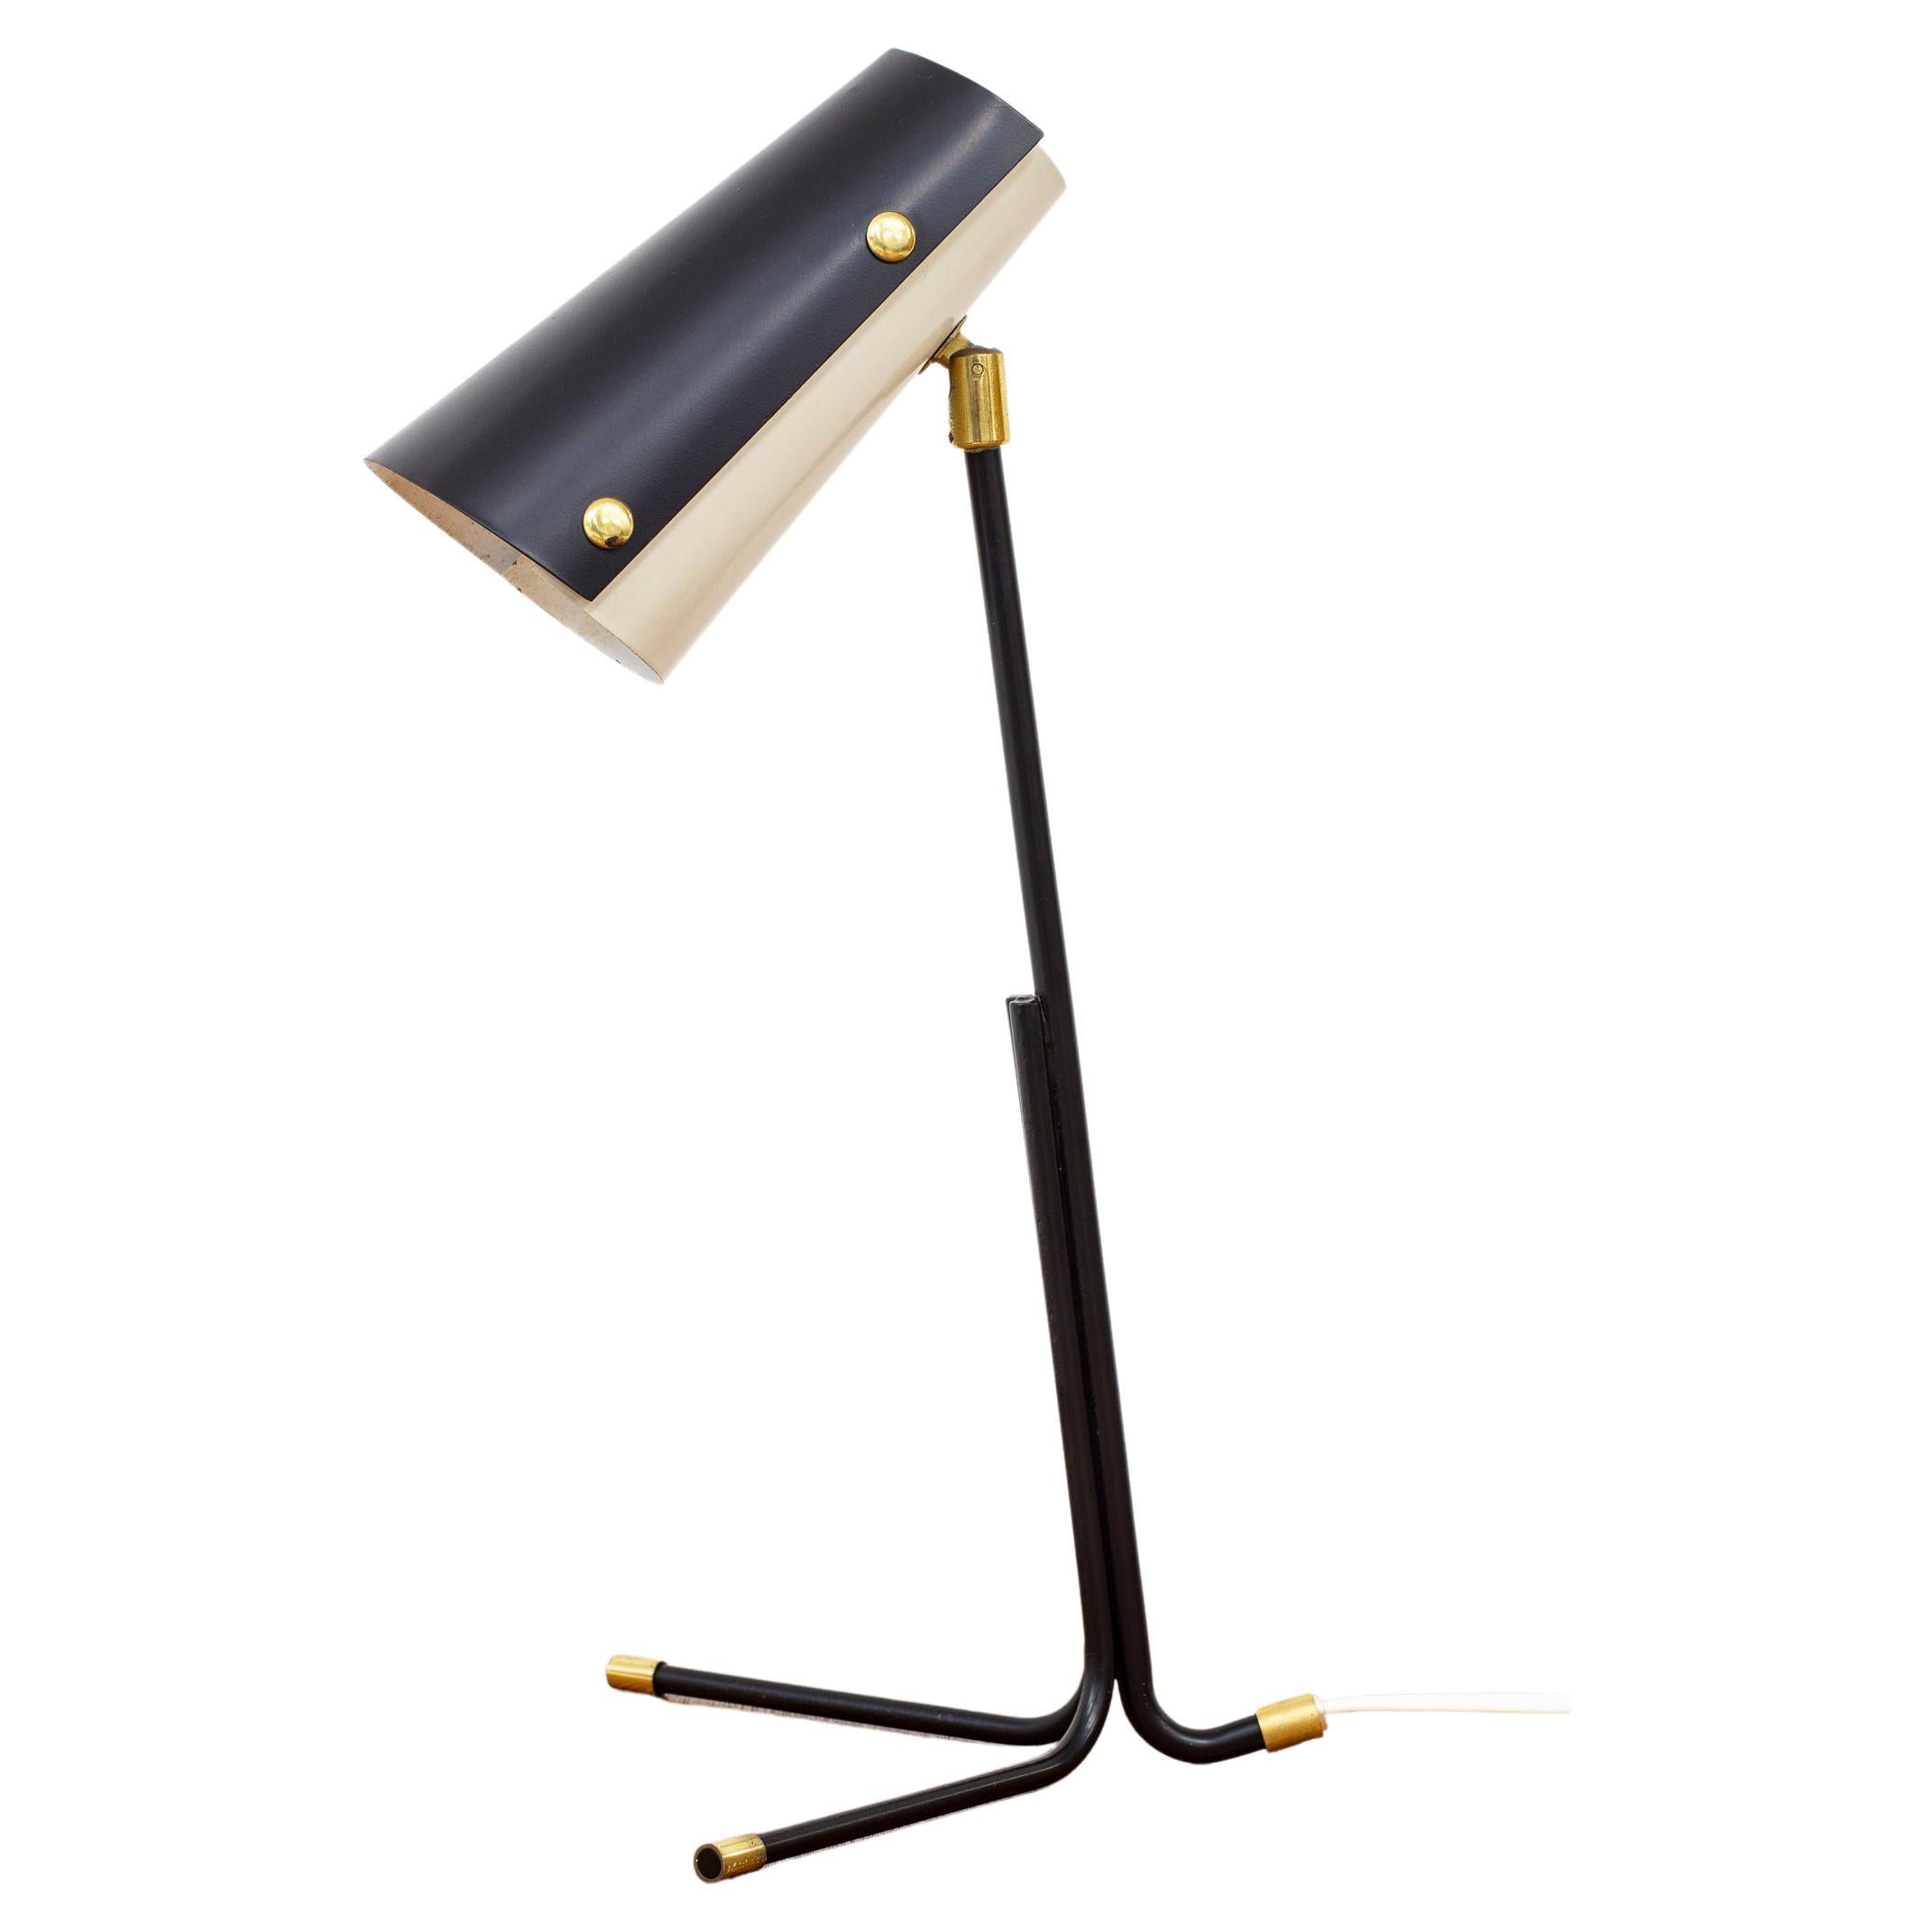 Midcentury Scandinavian Table Lamp in Black and Brass by Boréns, Sweden, 1950s